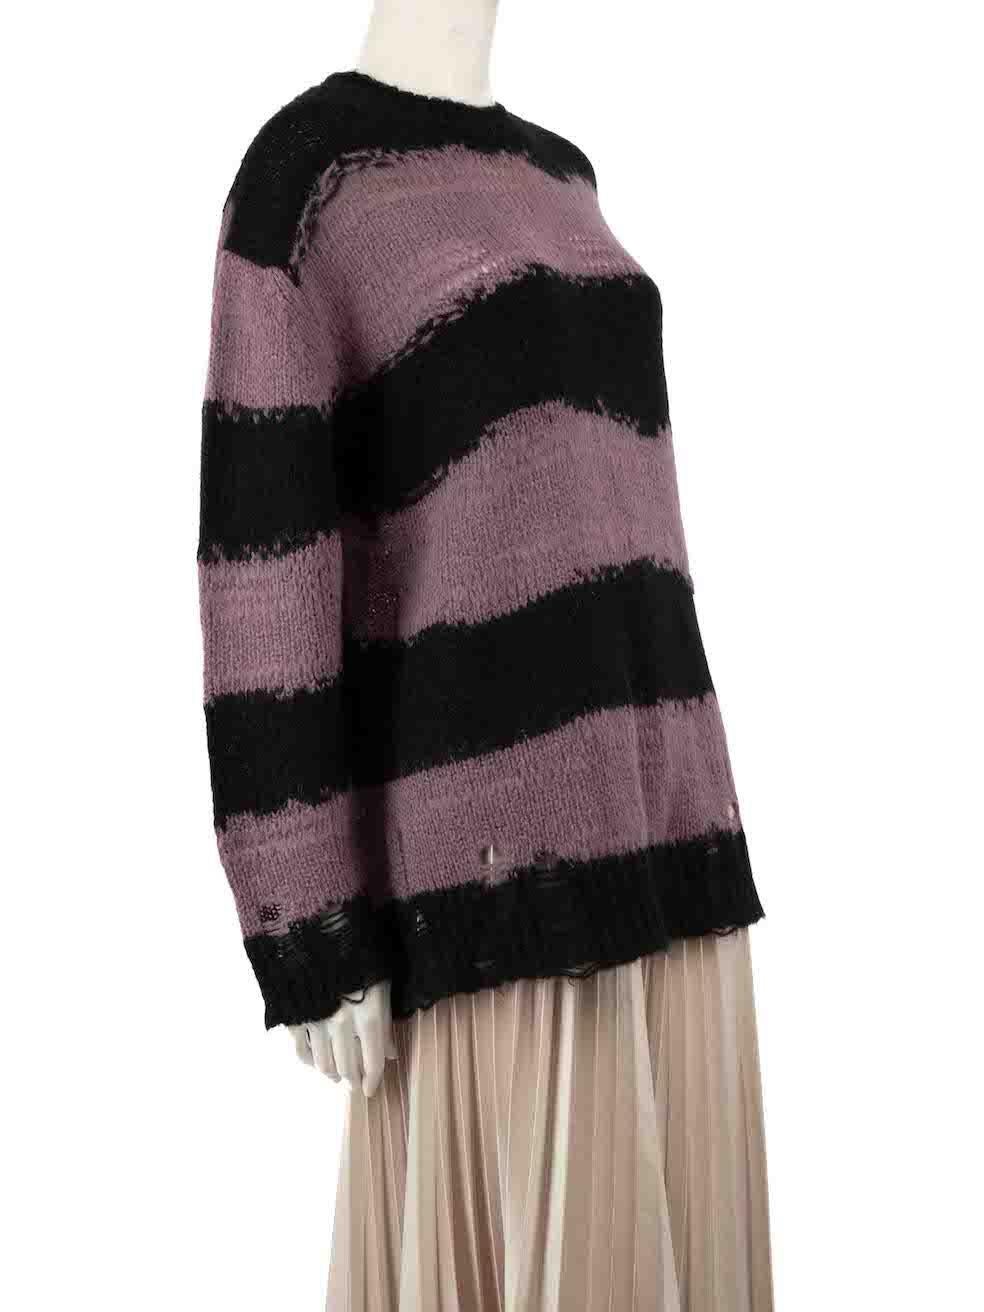 CONDITION is Very good. Hardly any visible wear to jumper is evident on this used Acne Studios designer resale item.
 
 
 
 Details
 
 
 Multicolour- purple and black
 
 Synthetic
 
 Knit jumper
 
 Striped pattern
 
 Long sleeves
 
 Round neck
 
 
